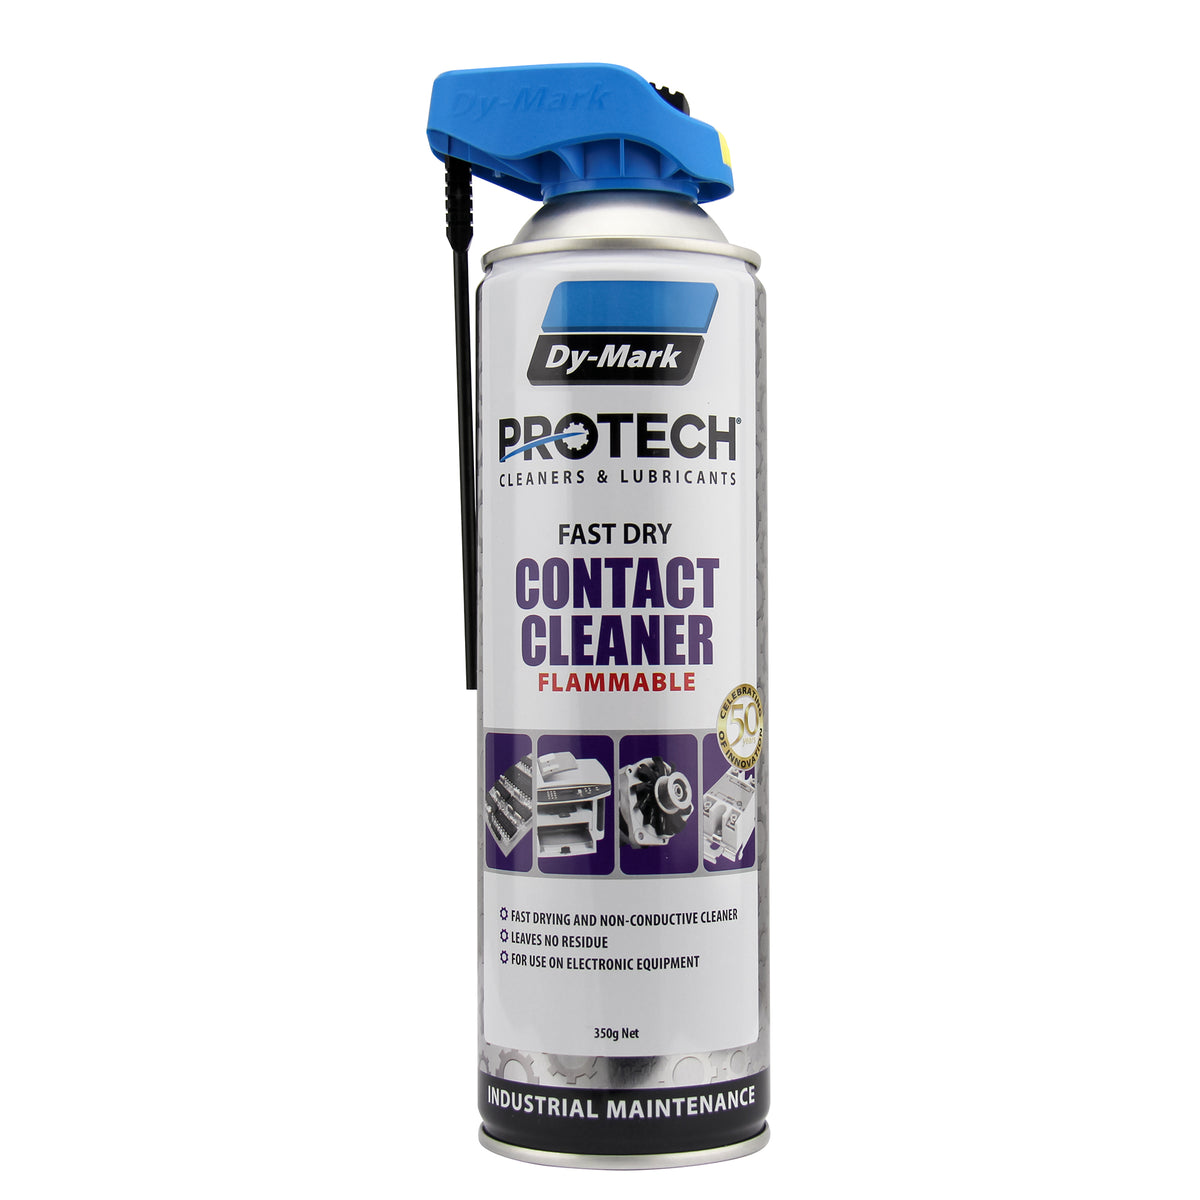 Protech Contact Cleaner Flammable - Aerosol 350g